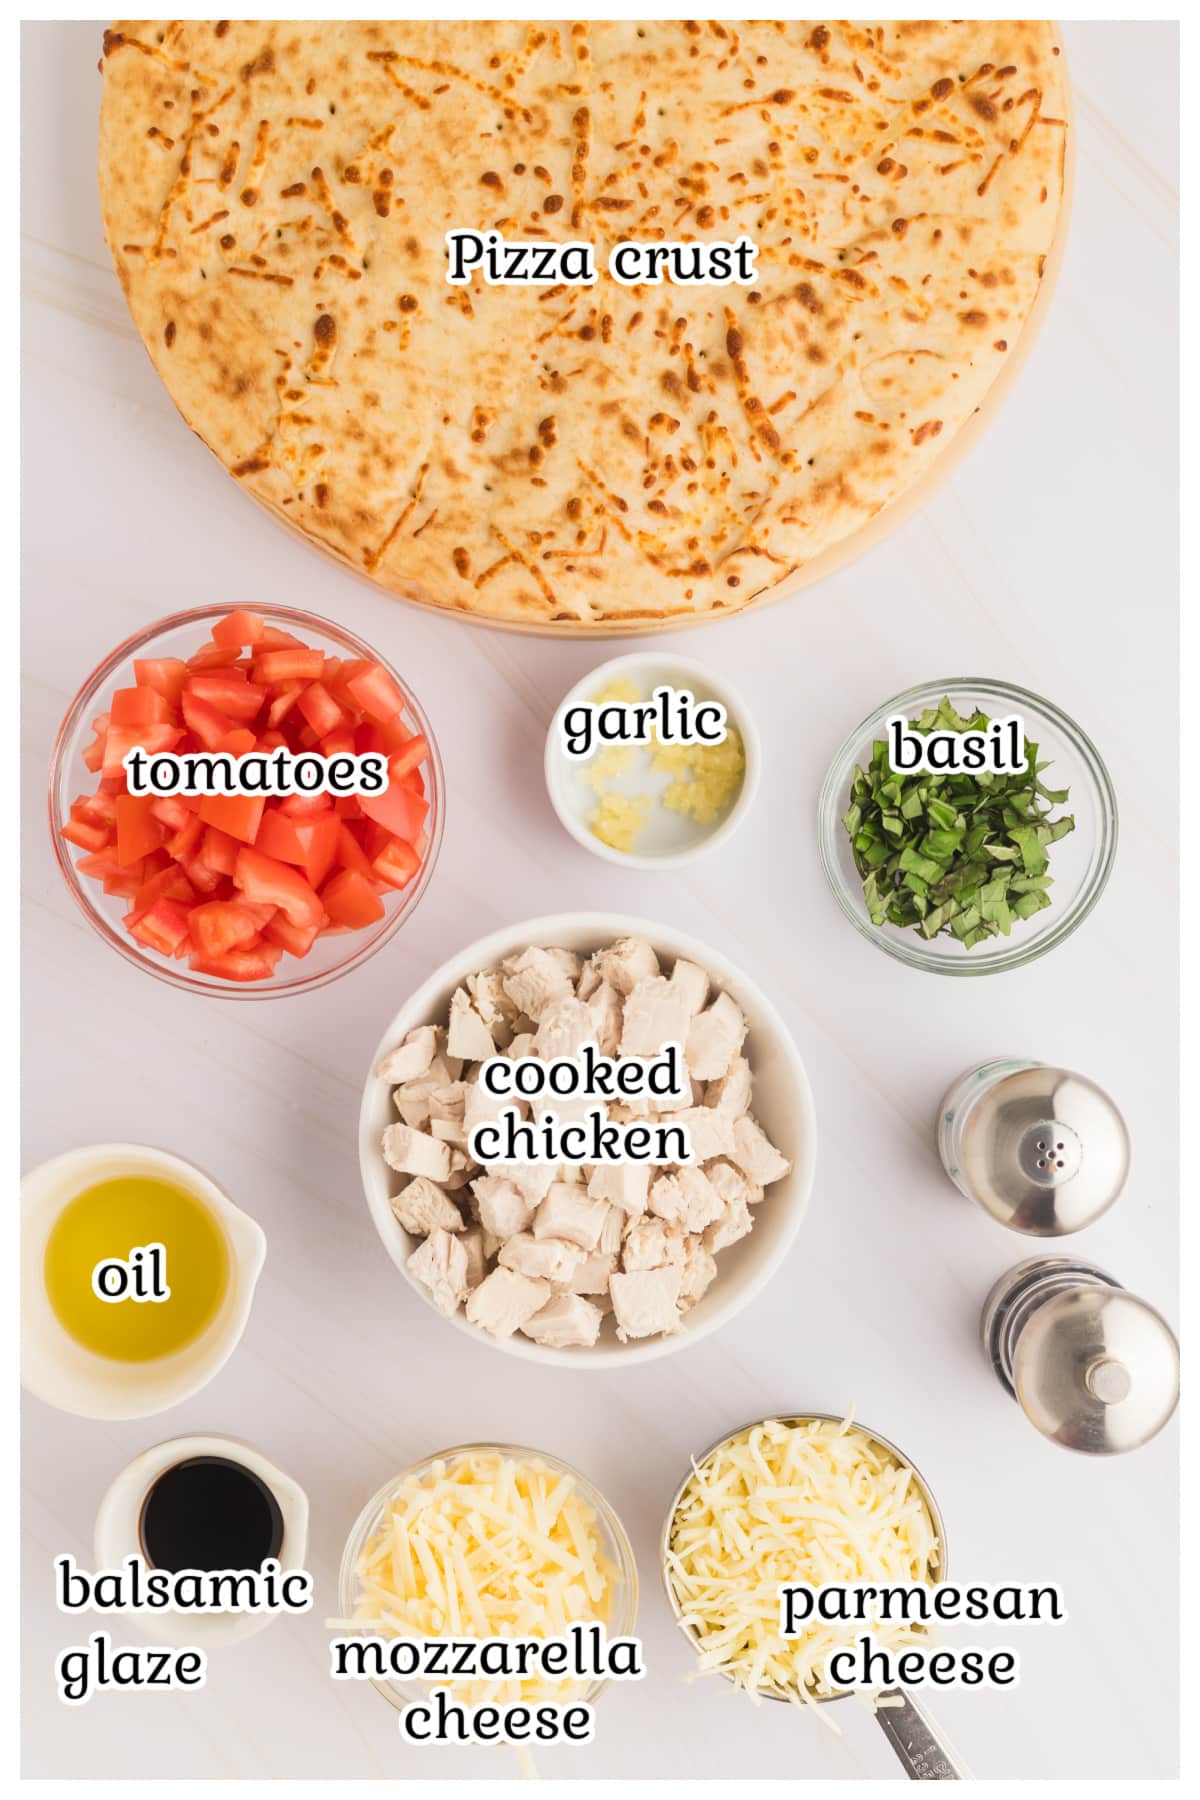 Ingredients to make the pizza recipe with text overlay.